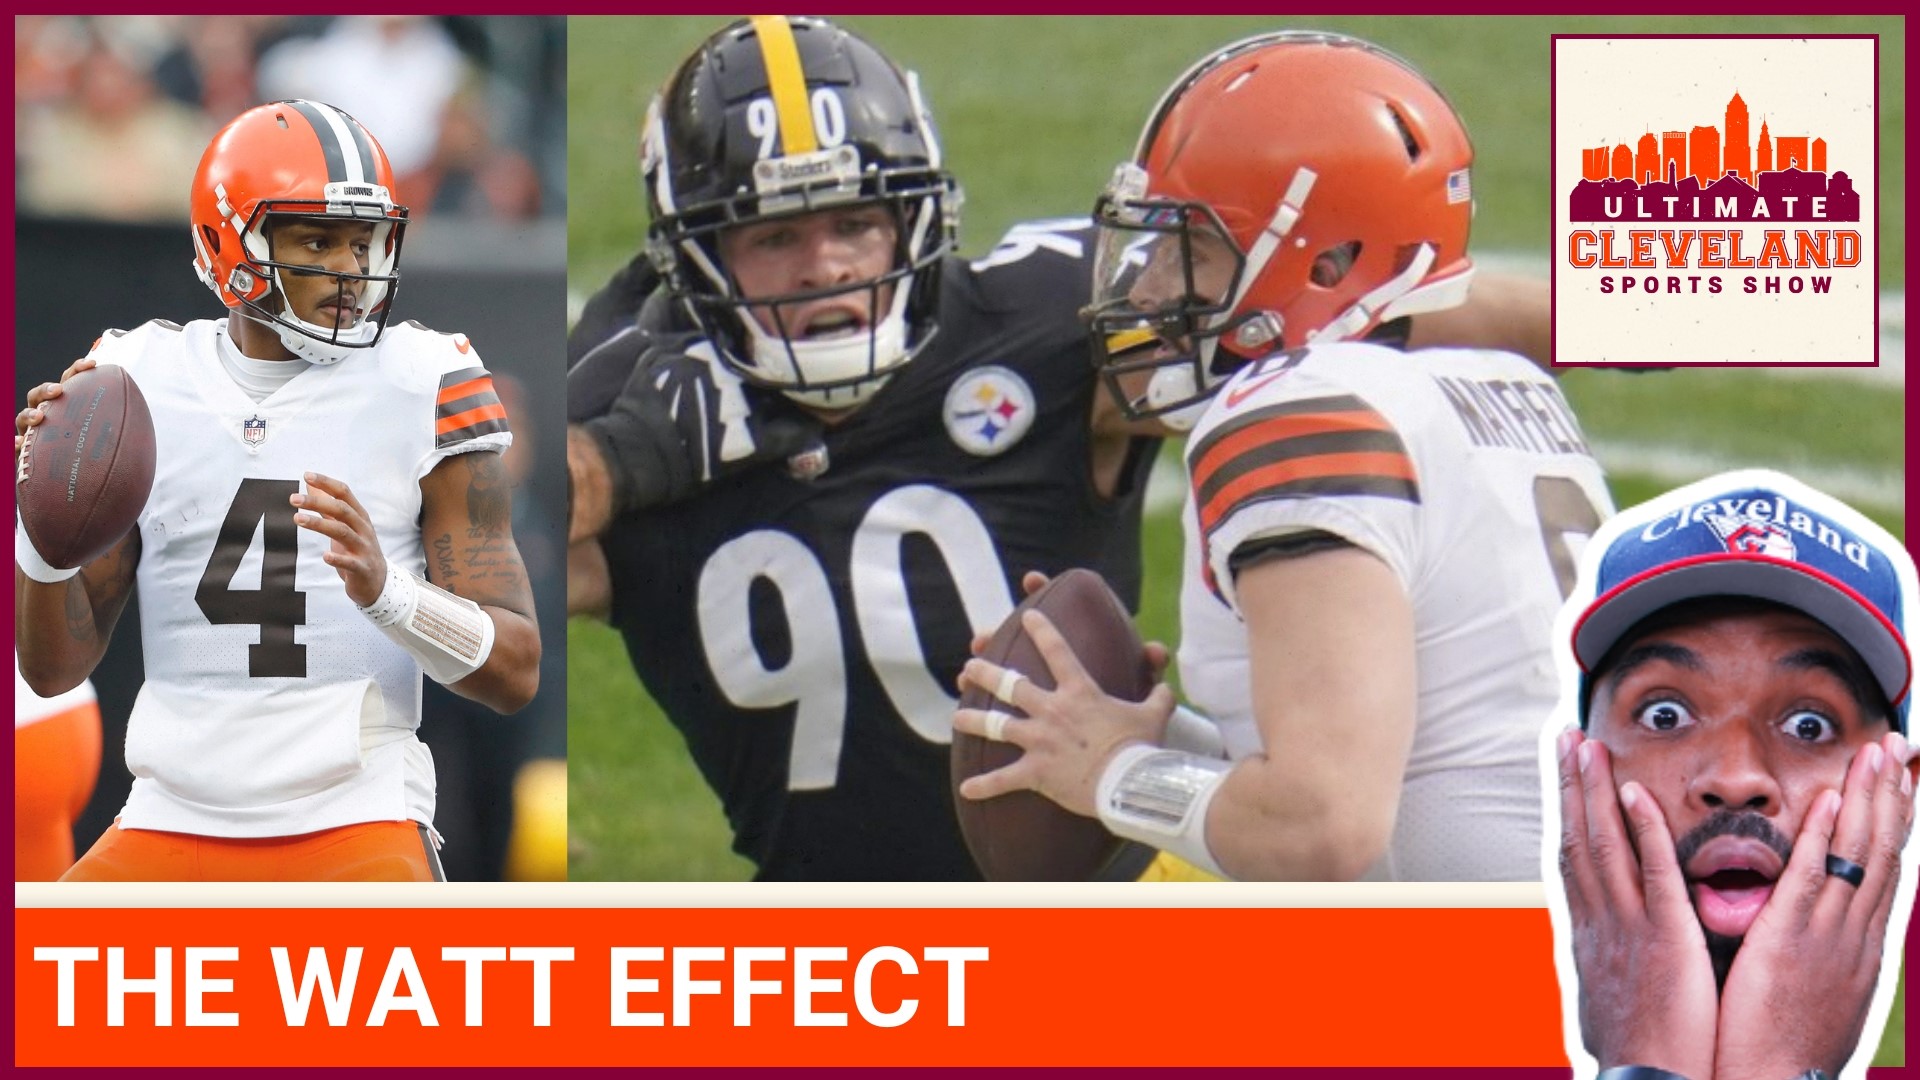 T.J. Watt may be the most impactful defensive player in the NFL. The Pittsburgh Steelers star defensive end didn't play in the Week 3 matchup against Cleveland.